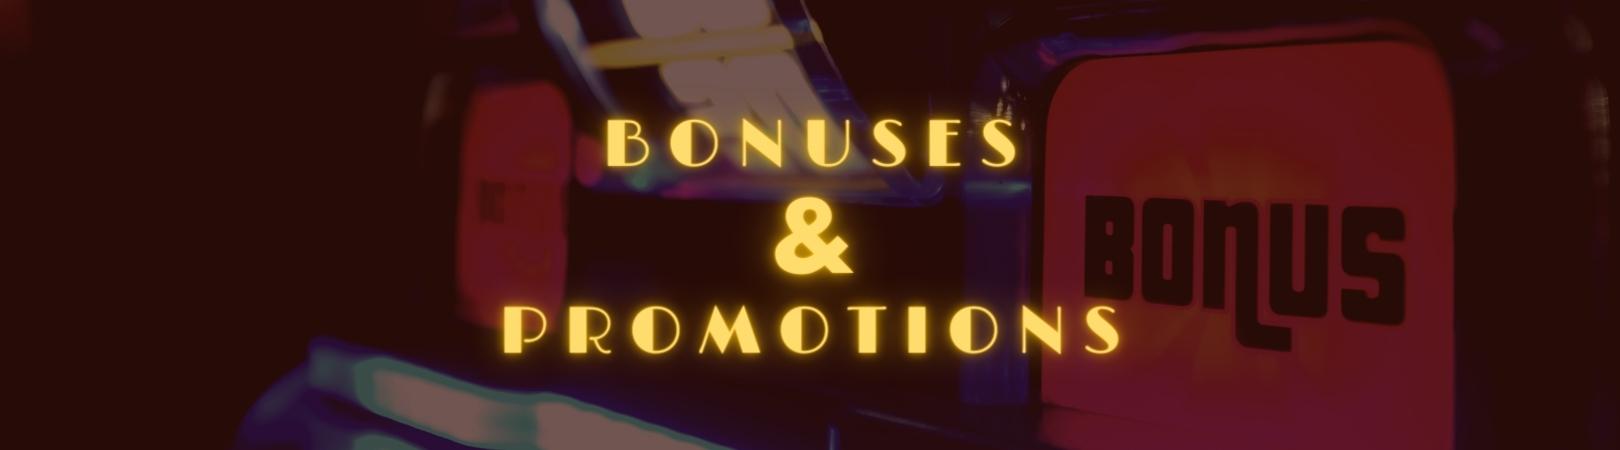 Bonuses and promotions img